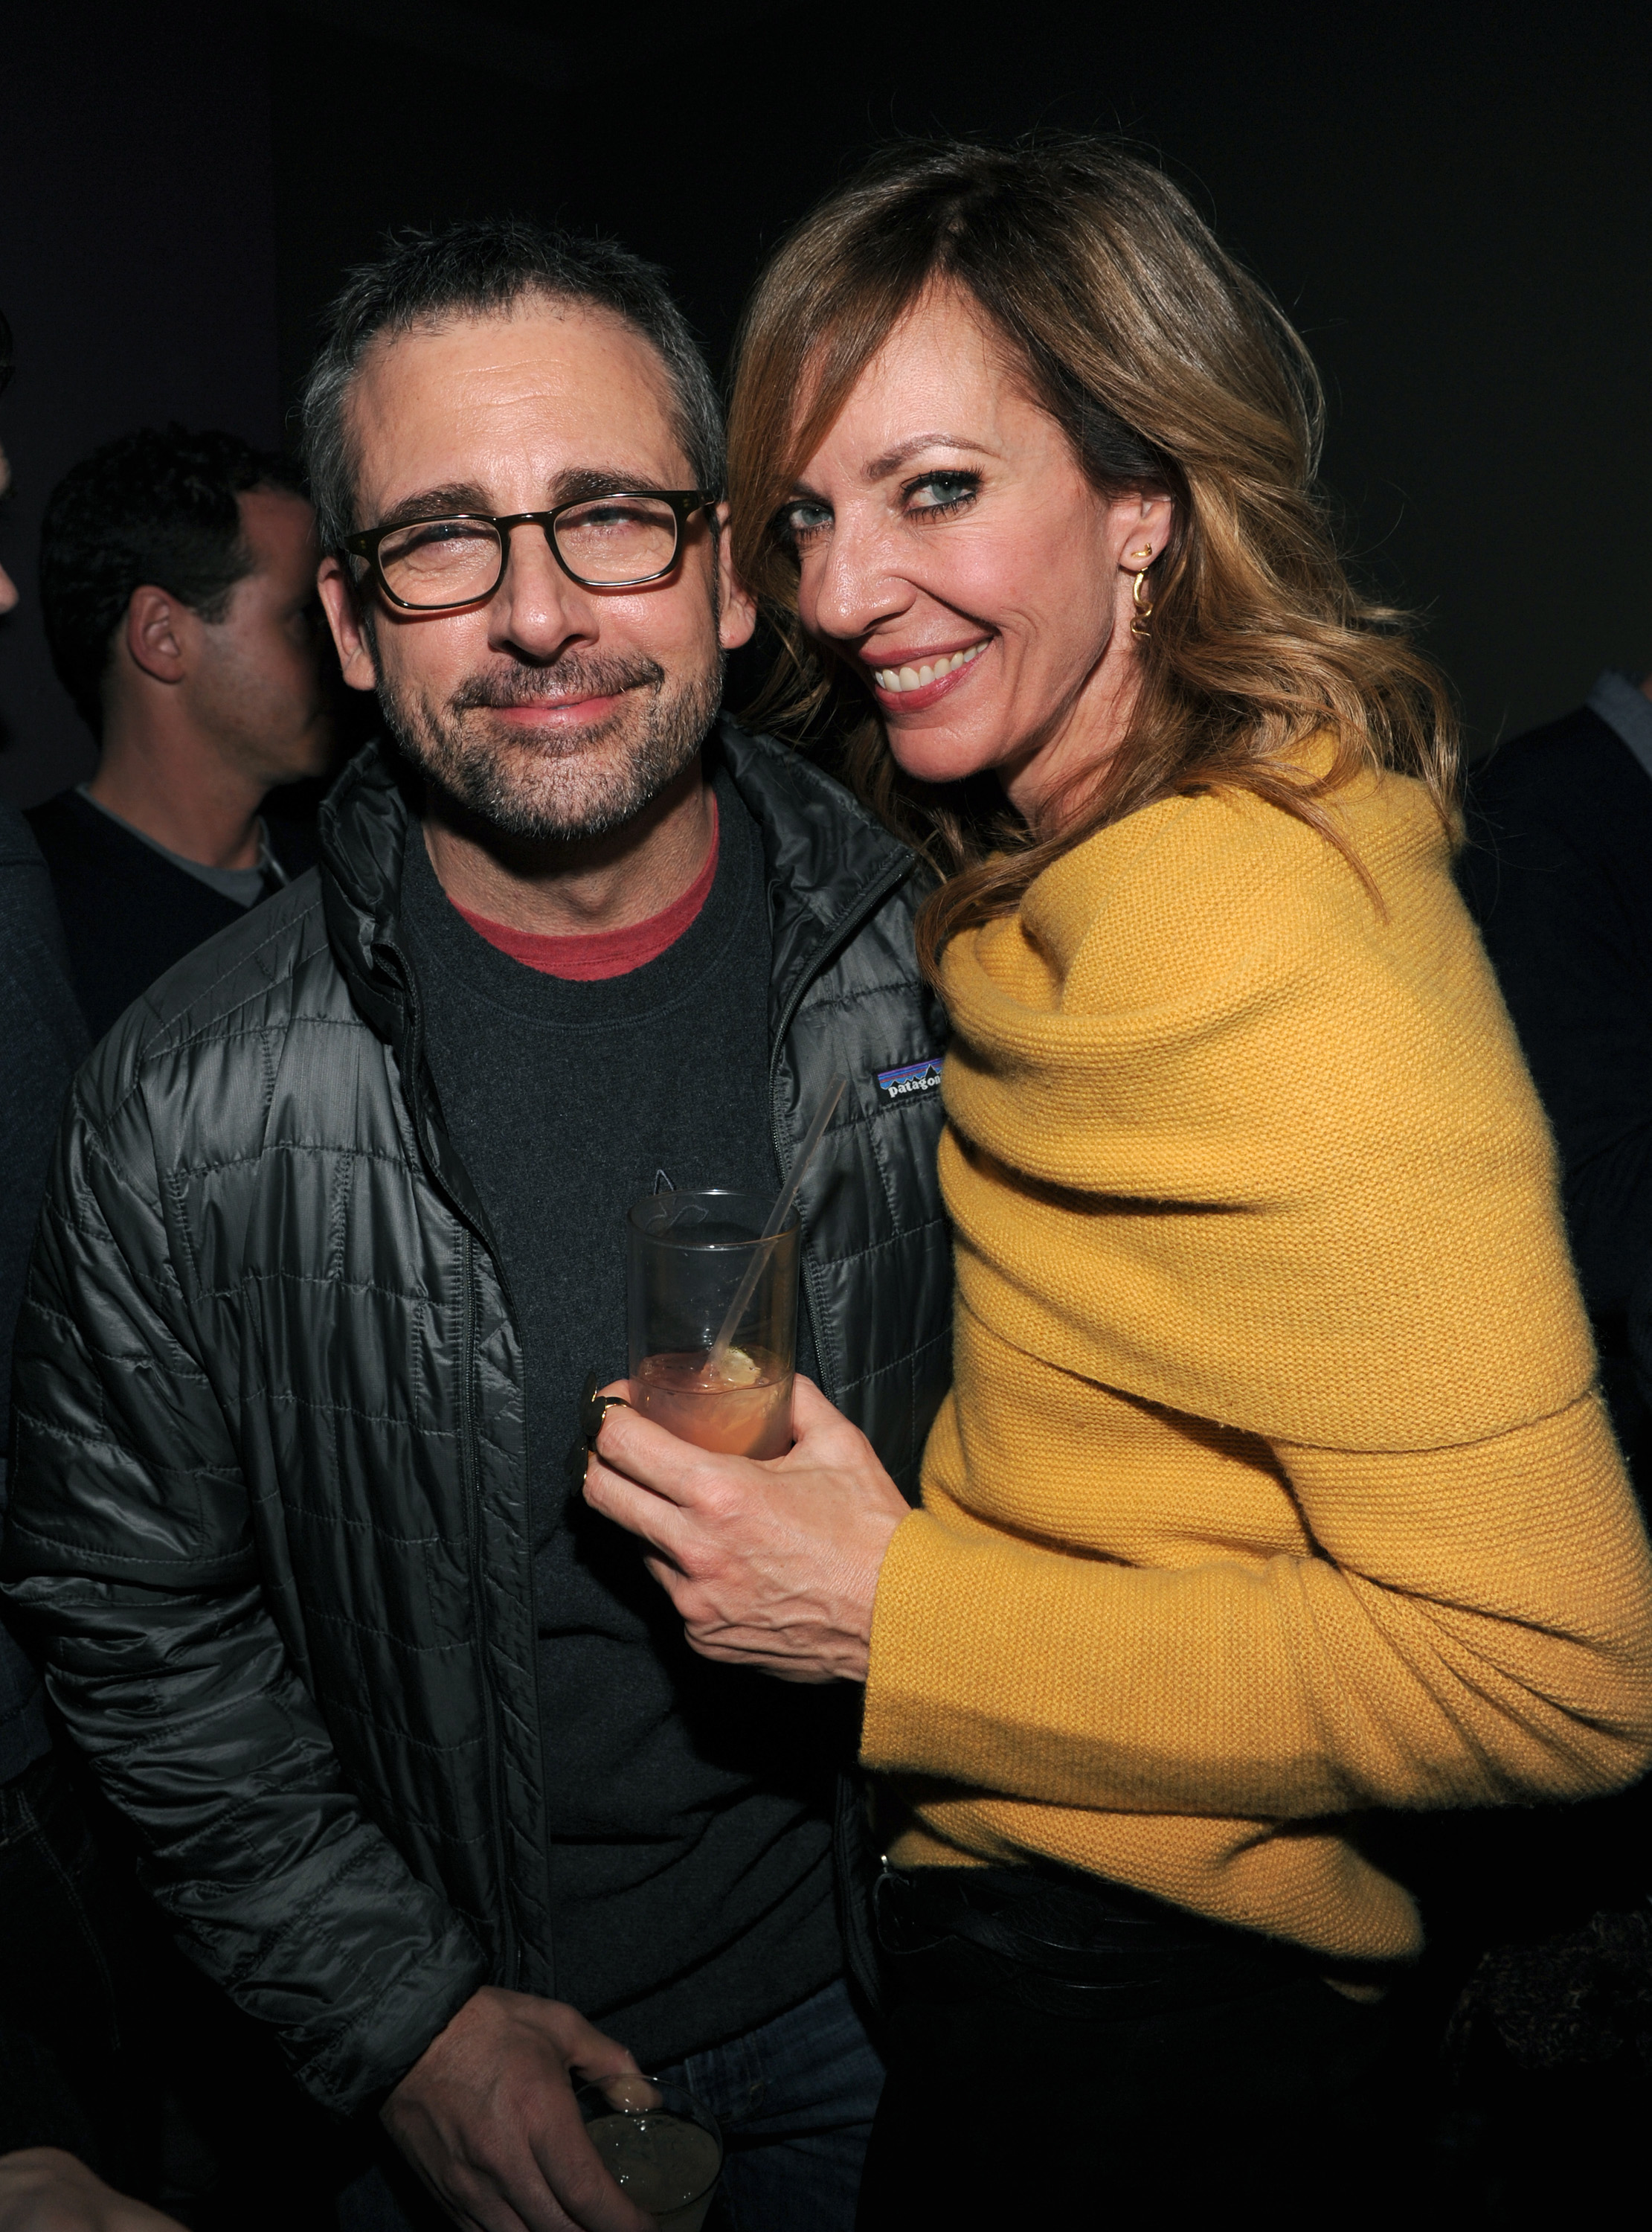 PARK CITY, UT - JANUARY 21:  Actors Steve Steve Carell and Allison Janney attends Grey Goose Blue Door "The Way Way Back" Party on January 21, 2013 in Park City, Utah.  (Photo by Jamie McCarthy/Getty Images for Grey Goose)